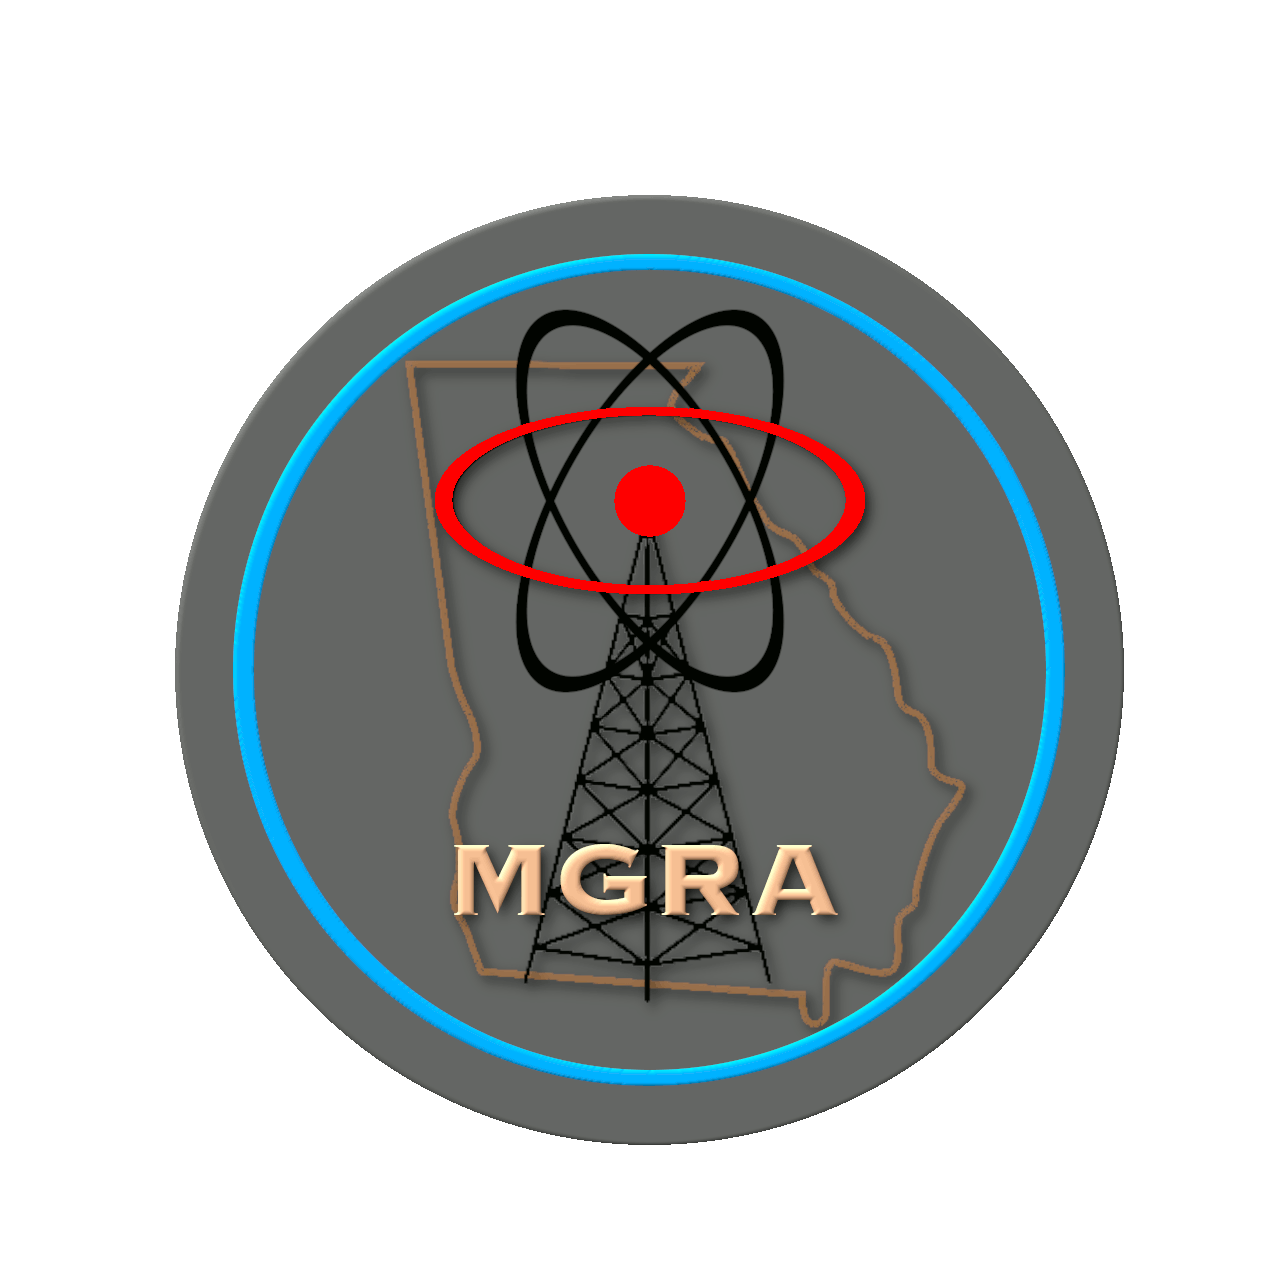 MGRA Logo Centered on Page